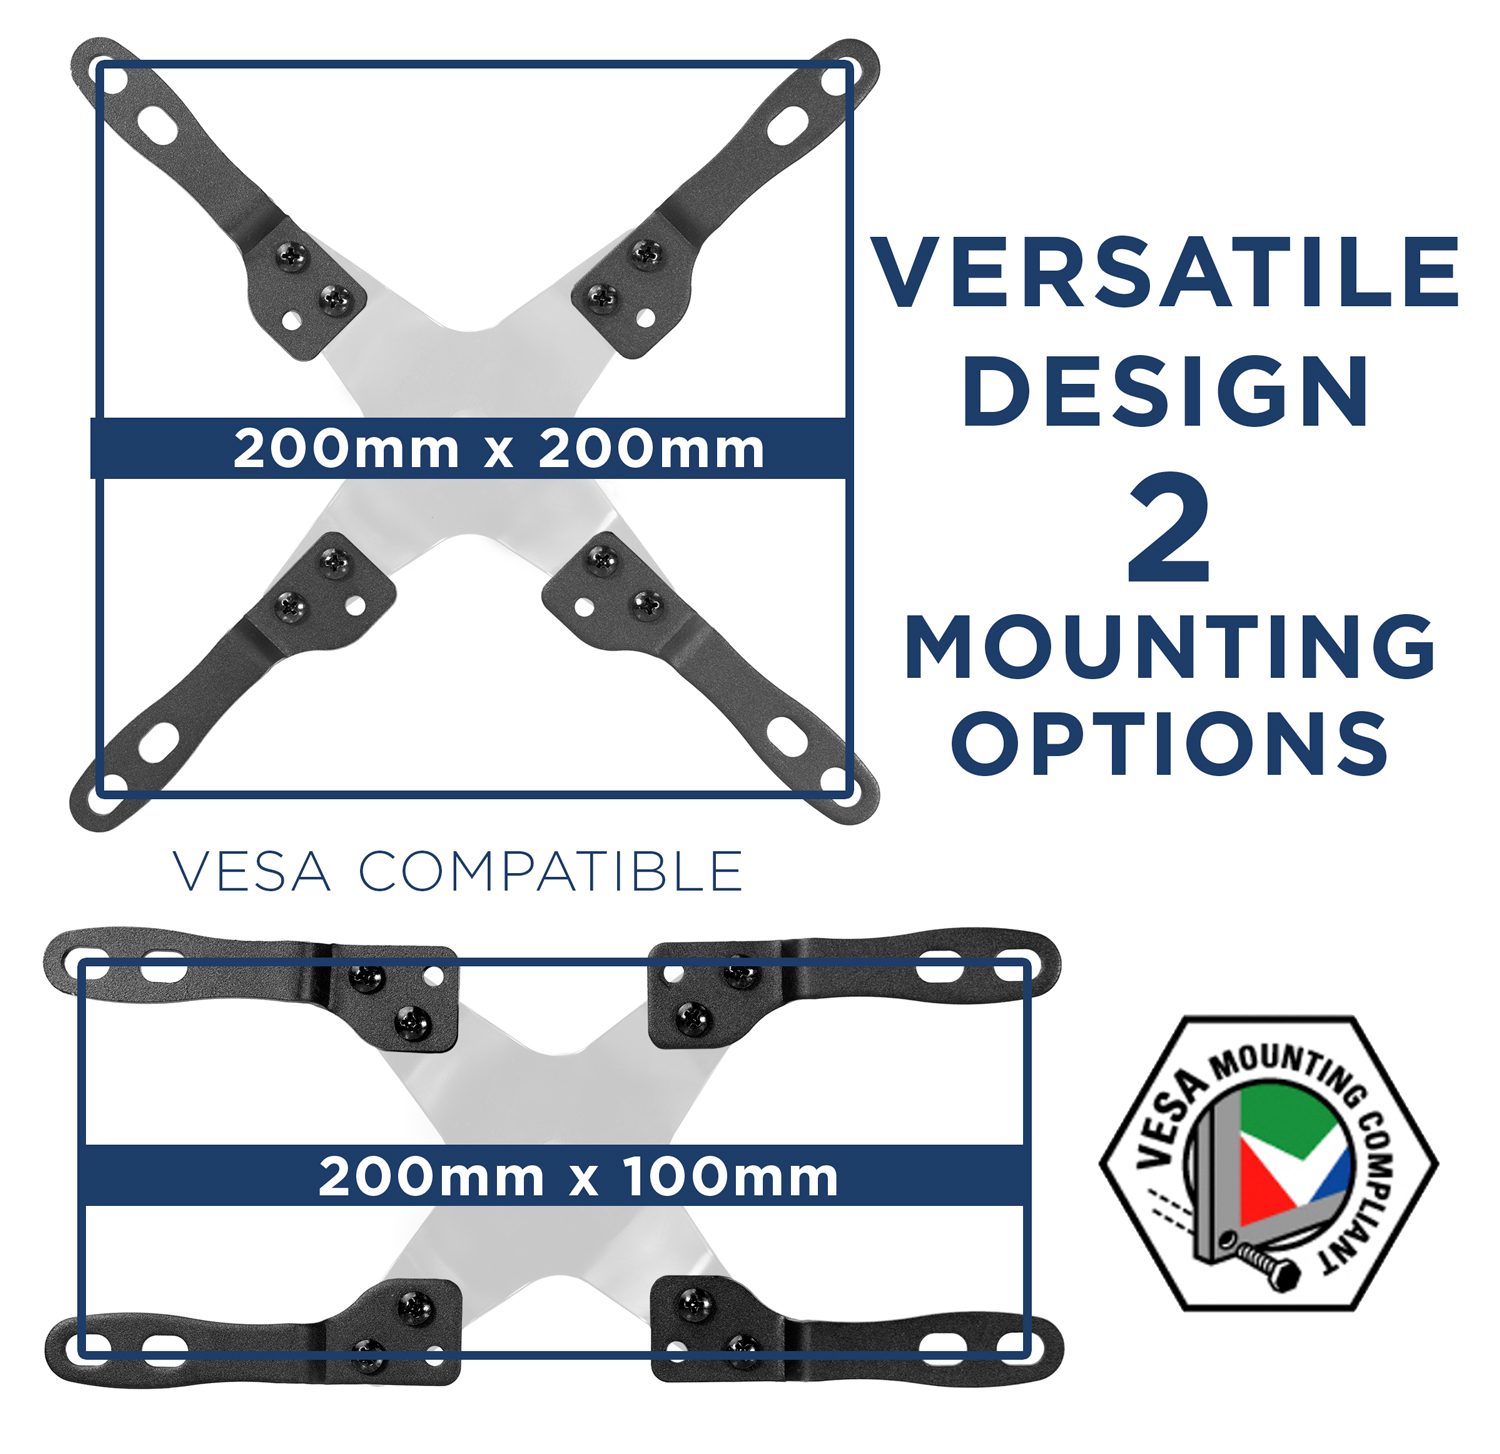 Mount-It! VESA Mount Adapter Kit, TV Wall Mount Bracket Adapter Converts 75x75 and 100x100 mm Patterns to 200x100 and 200x200 mm, Fits Most 23 inch to 42 inch TV's and Monitors, Hardware Included - image 4 of 8